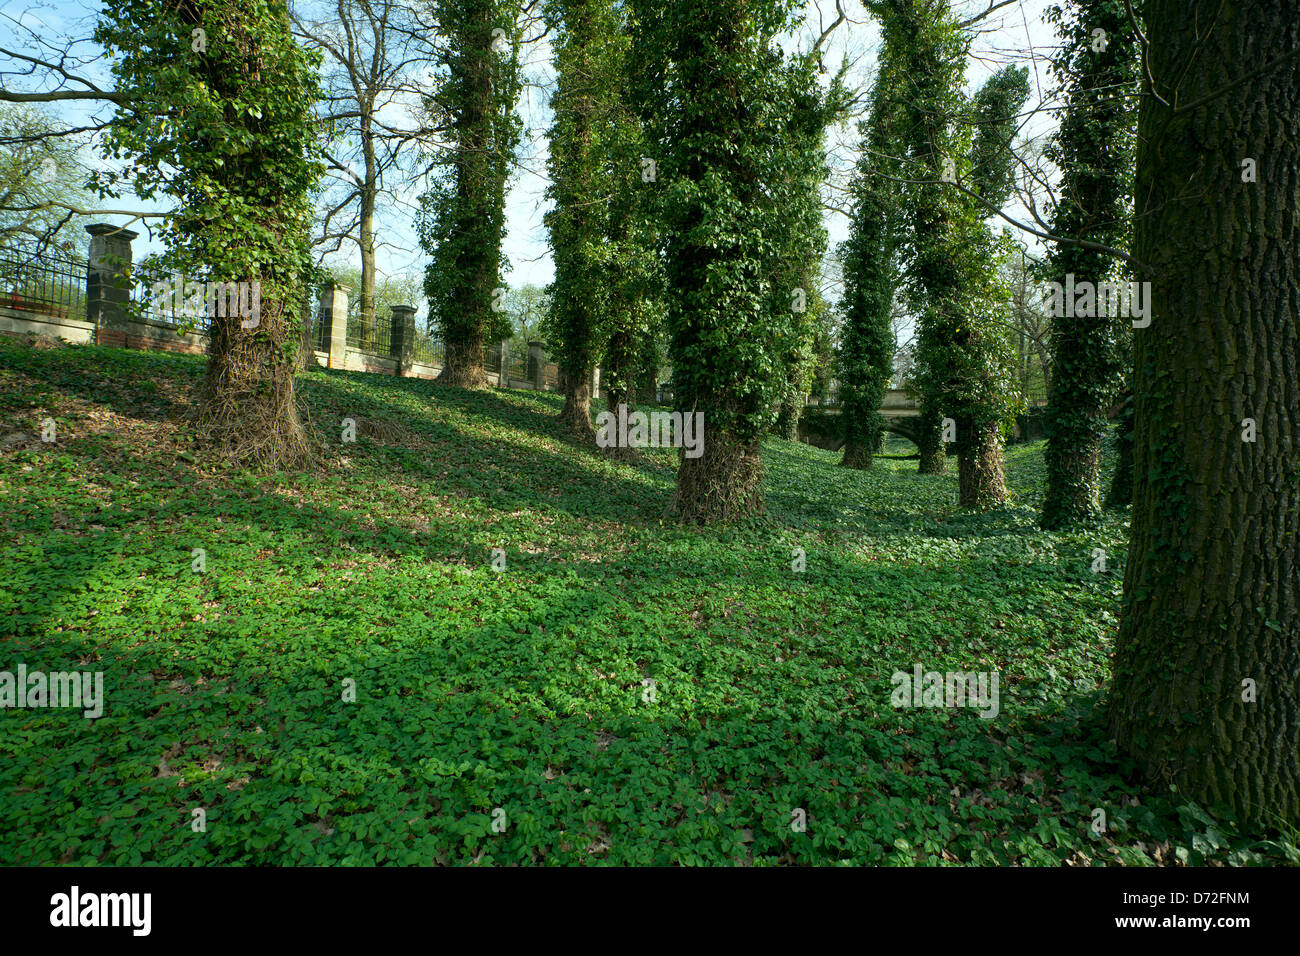 big trees in park covered in ivy Stock Photo